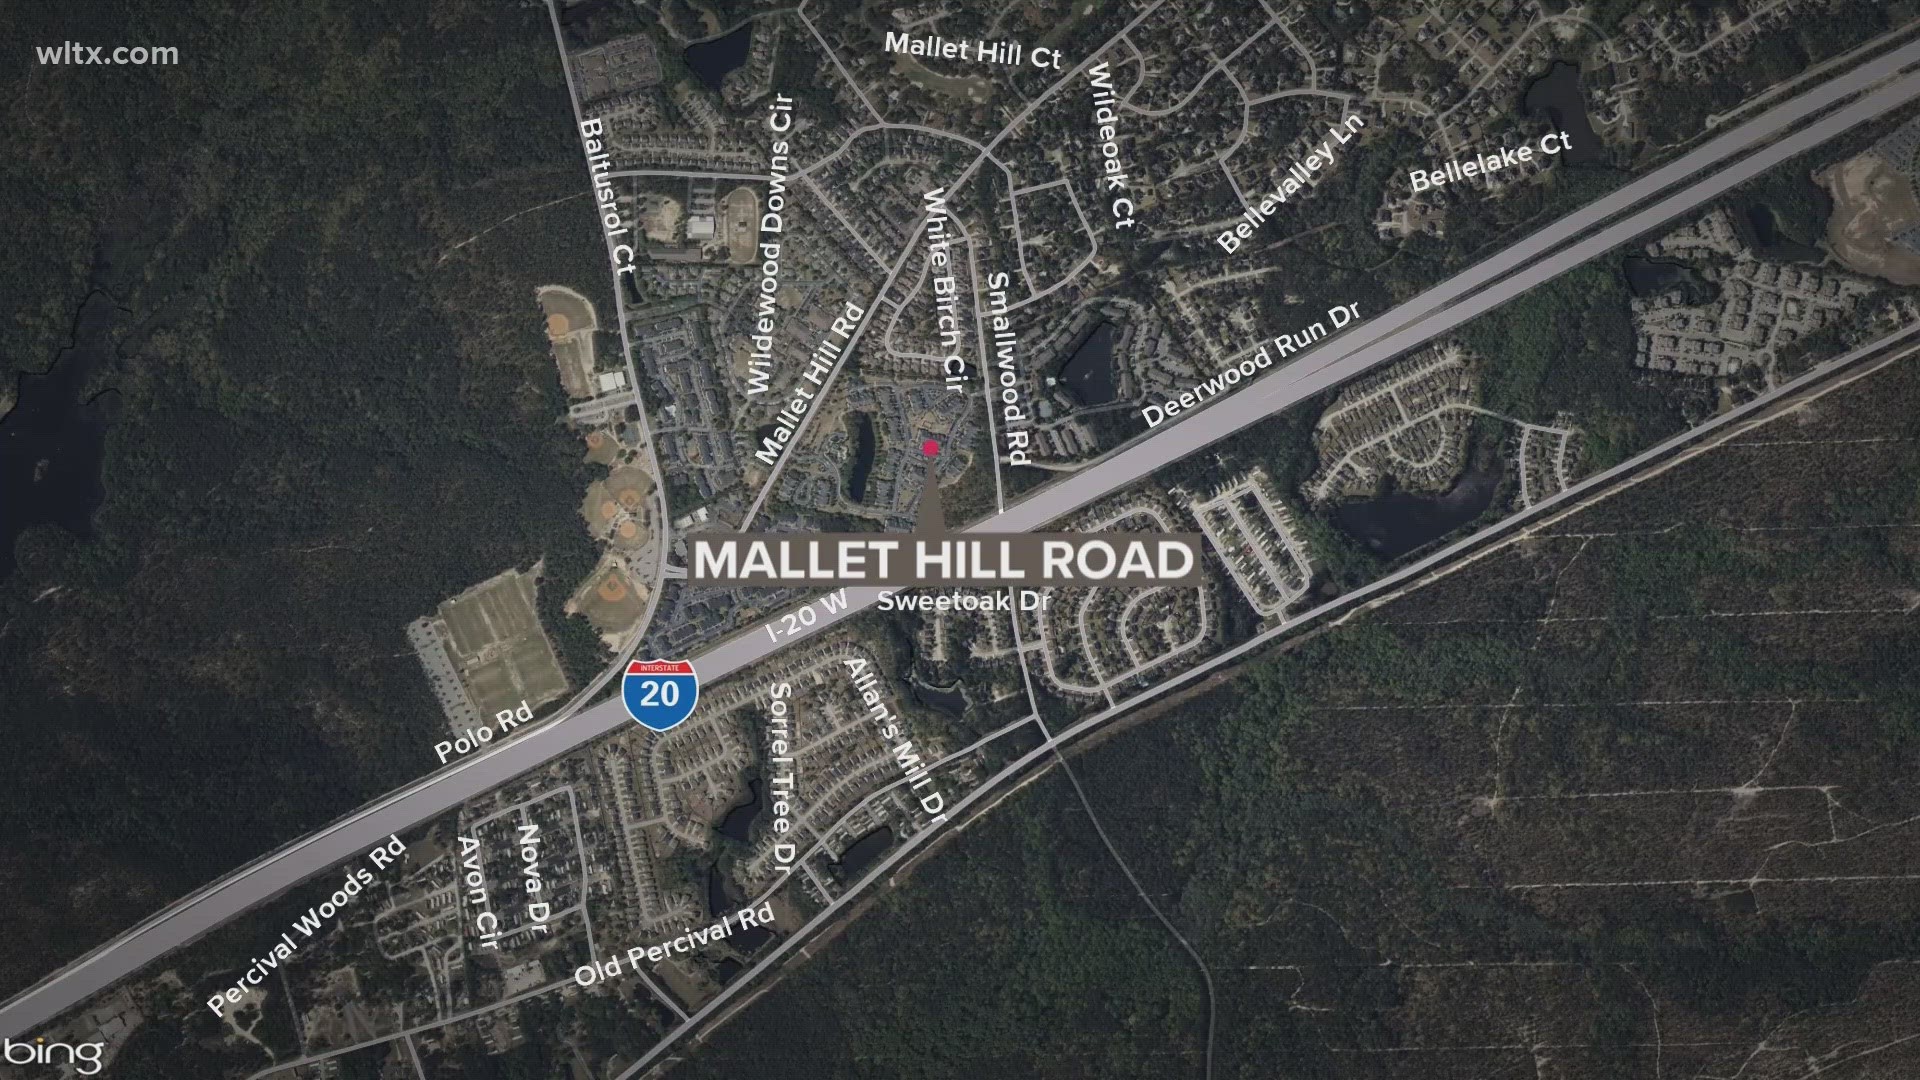 The incident happened on Sunday in the 700 block of Mallet Hill road